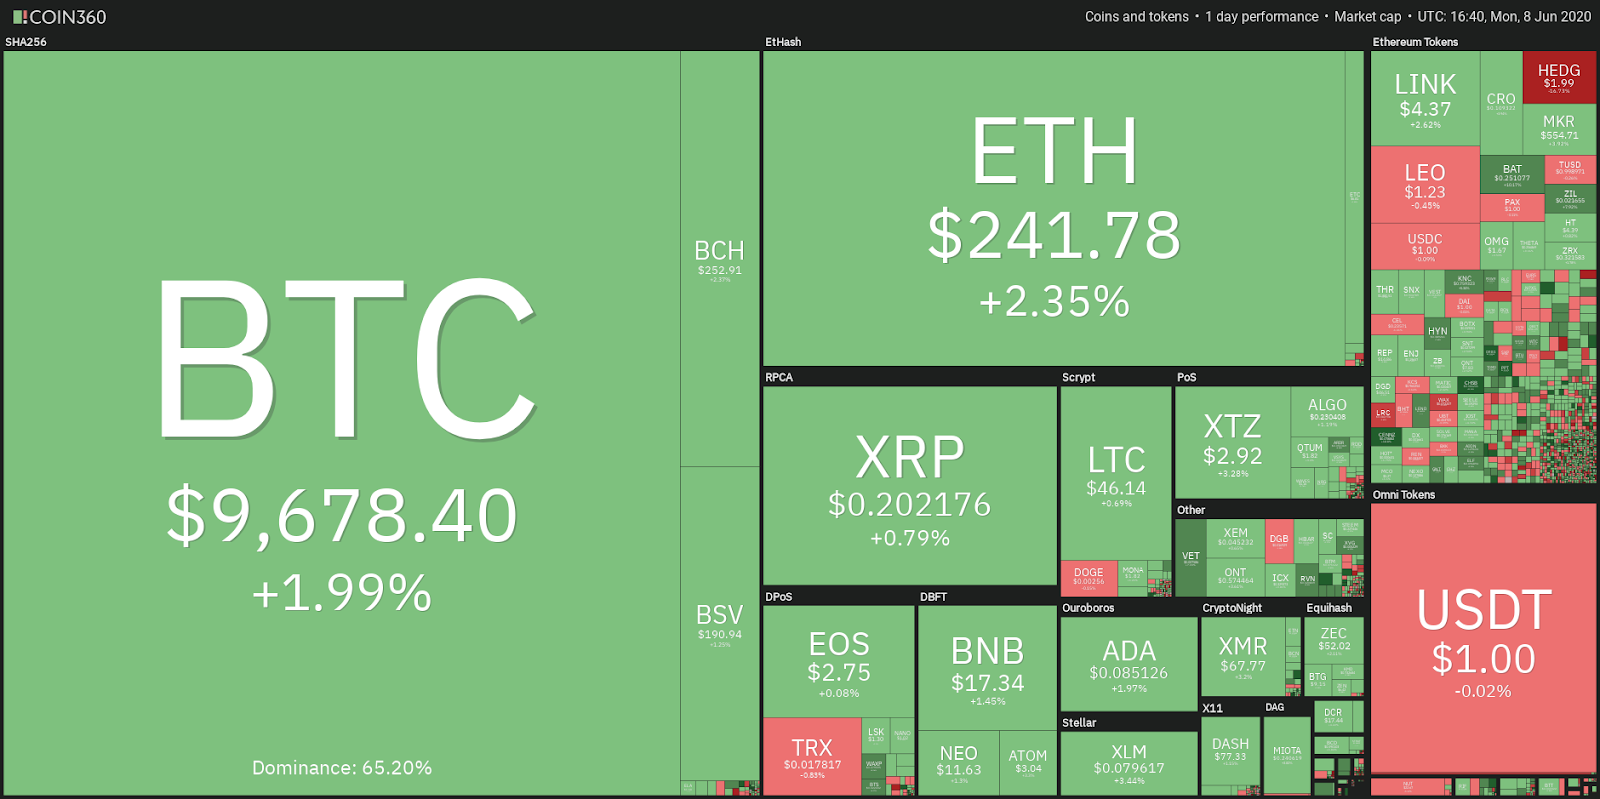 Daily cryptocurrency market performance